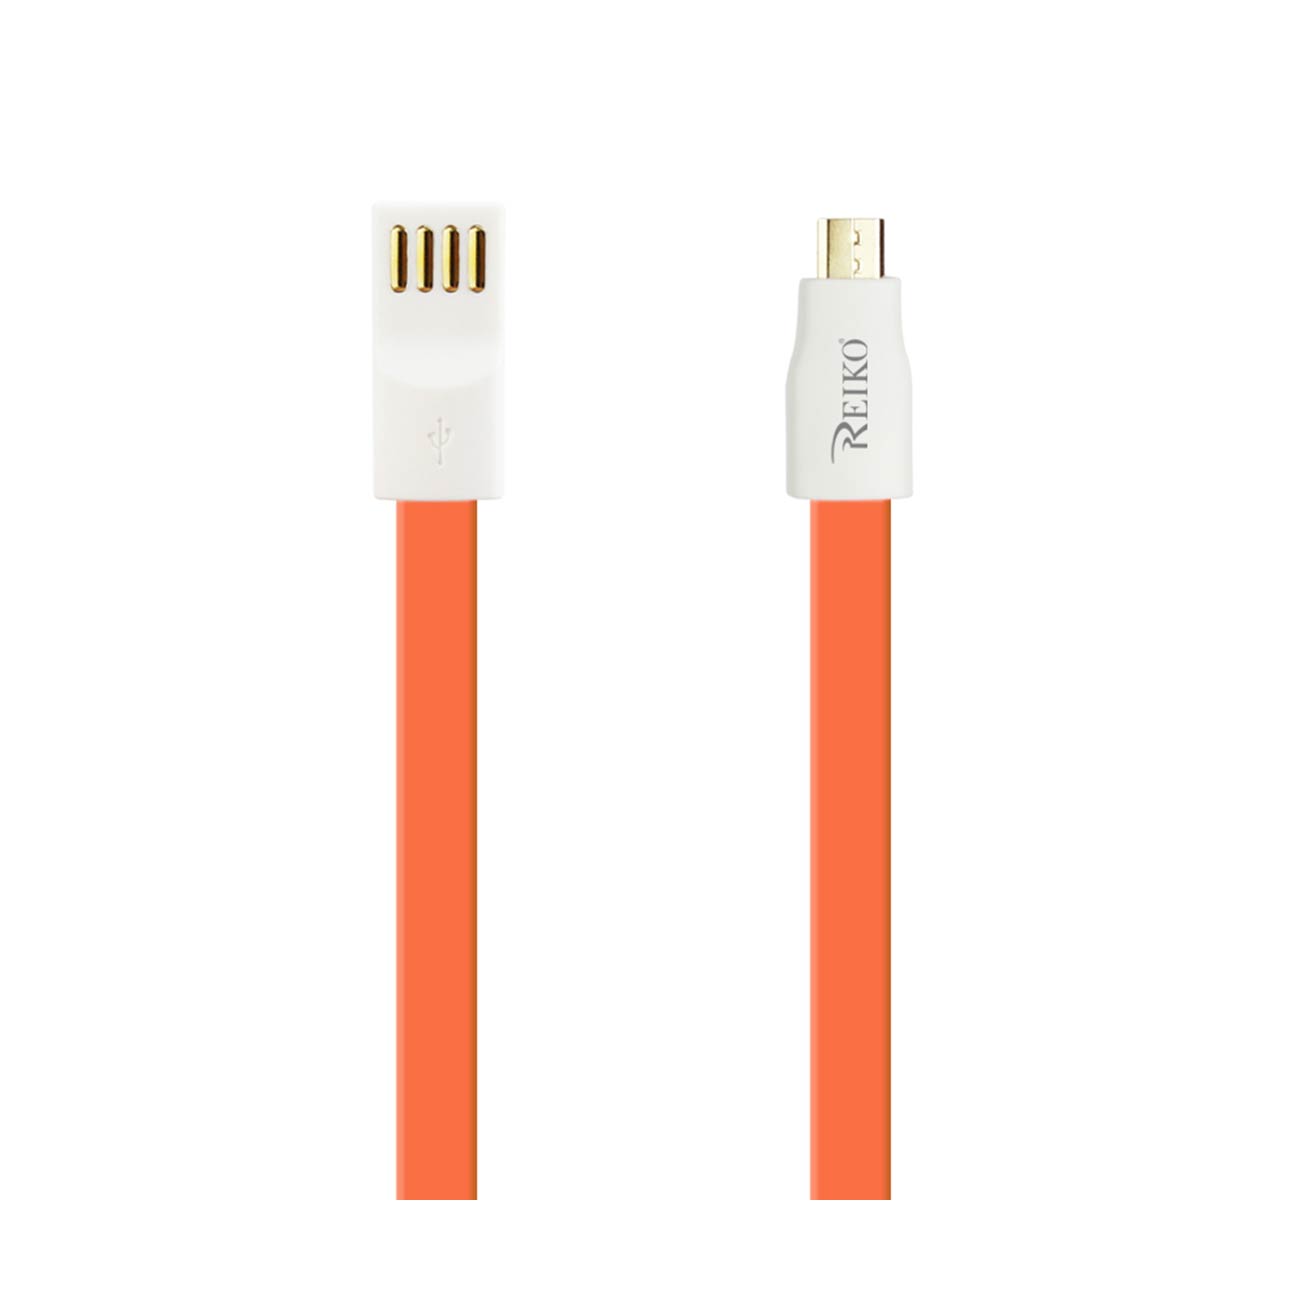 Data Cable USB Flat Micro Gold Plated 3.9Ft With Cable Tie Orange Color